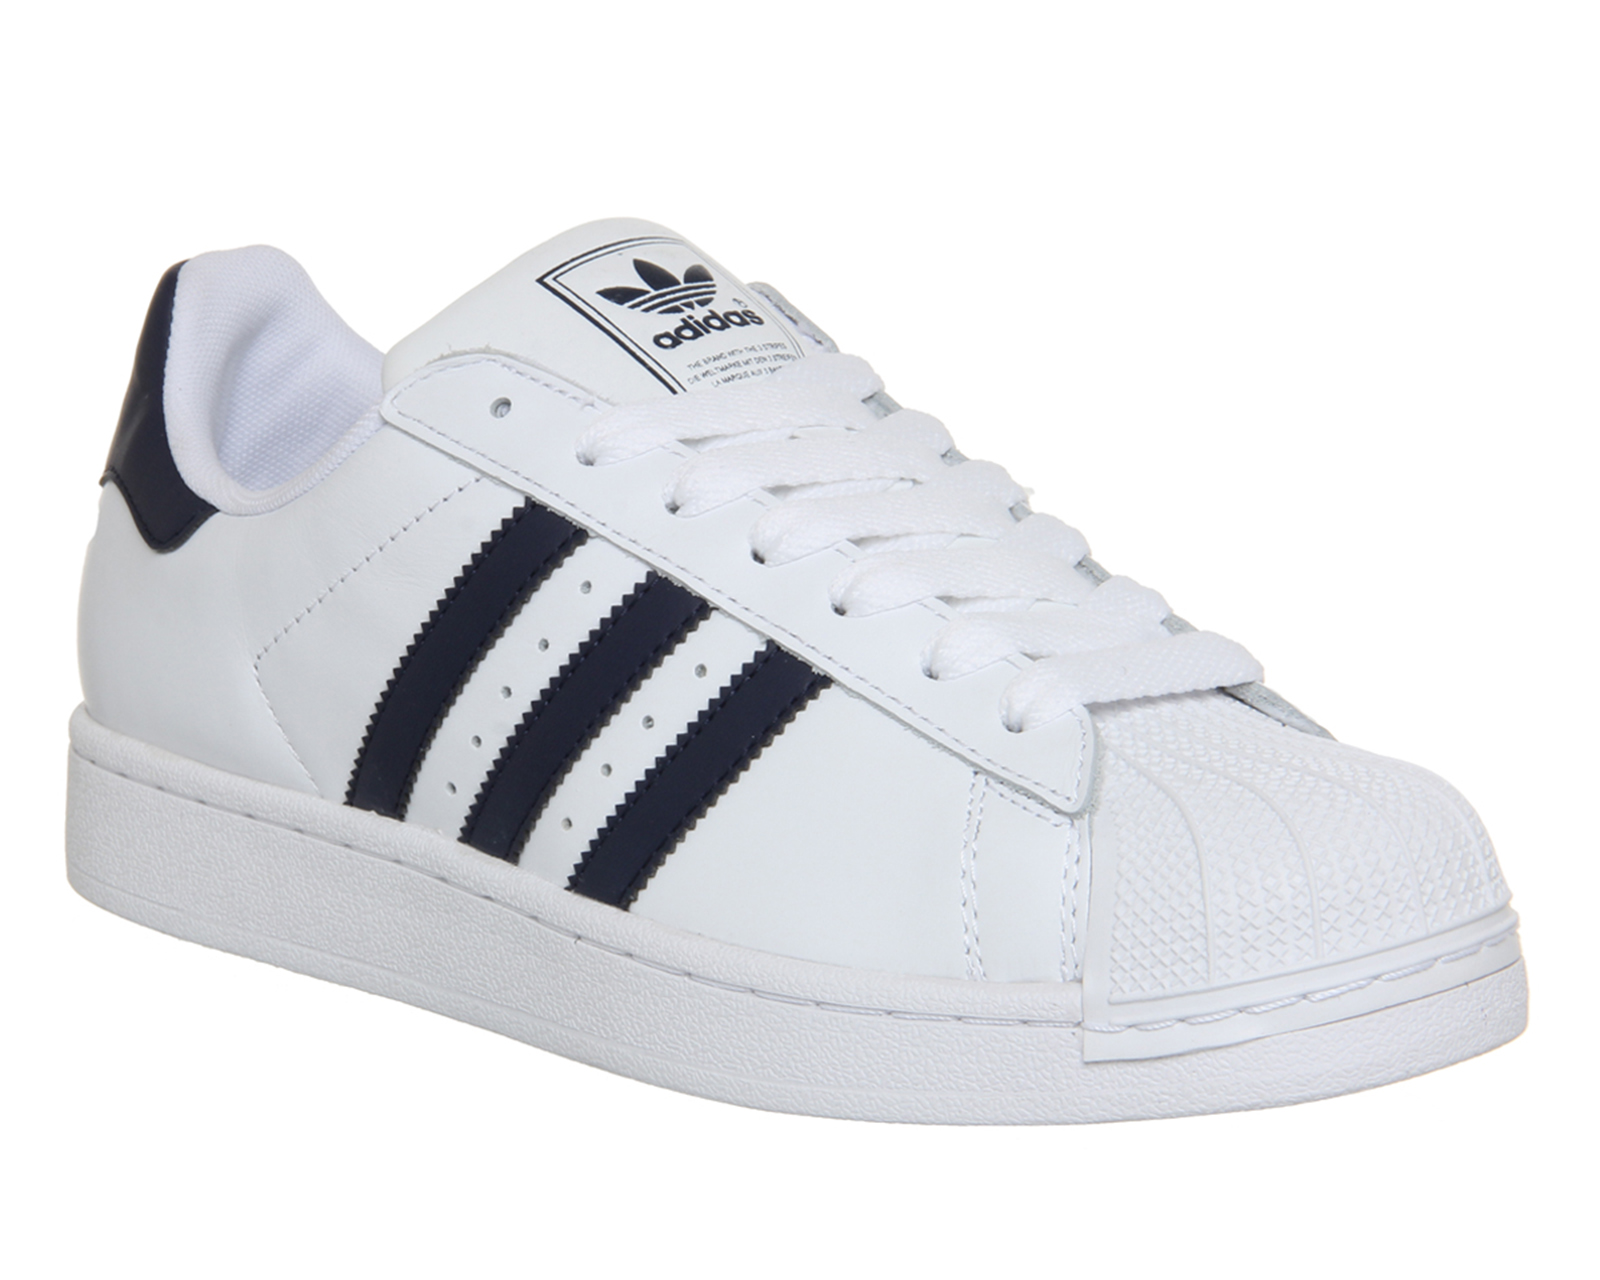 adidas superstar navy blue and white